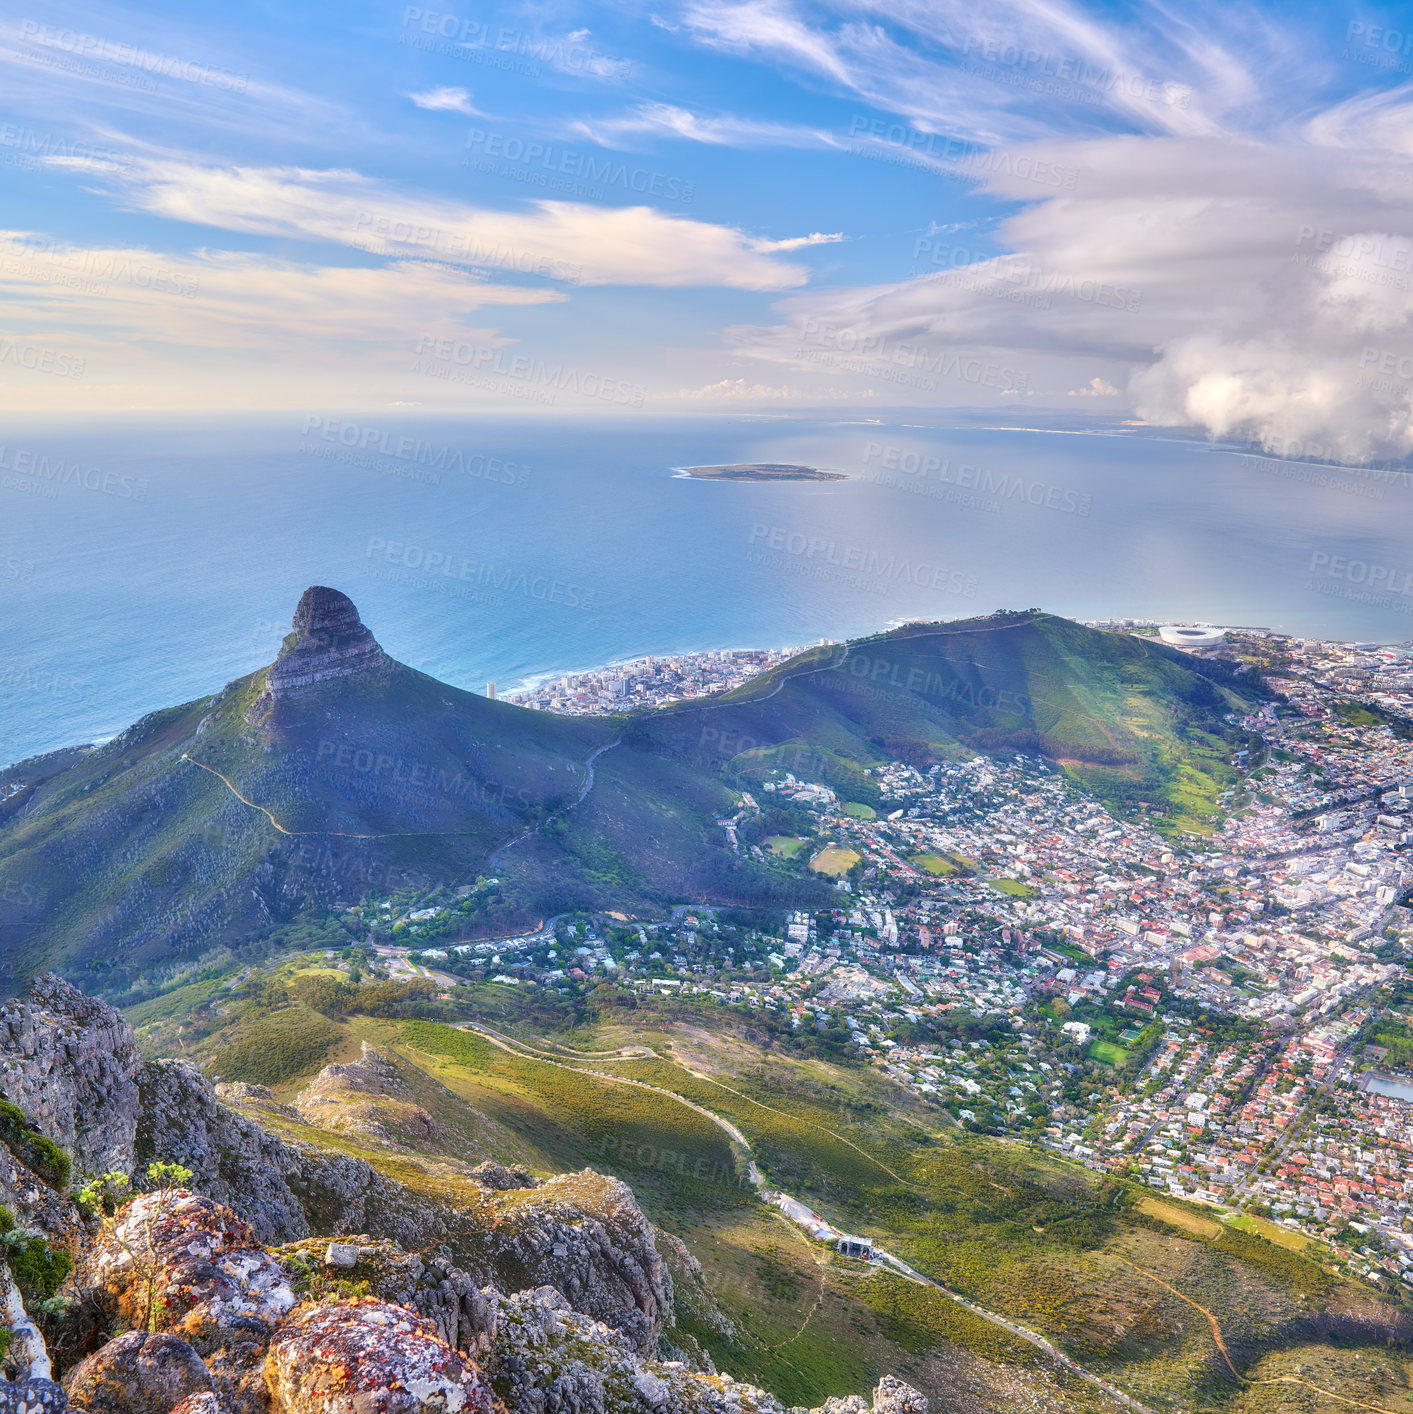 Buy stock photo Aerial landscape view of Lion's Head and surroundings in Cape Town, South Africa. Scenic natural landmark of a popular mountain against a cloudy blue sky in a beautiful urban city from above
